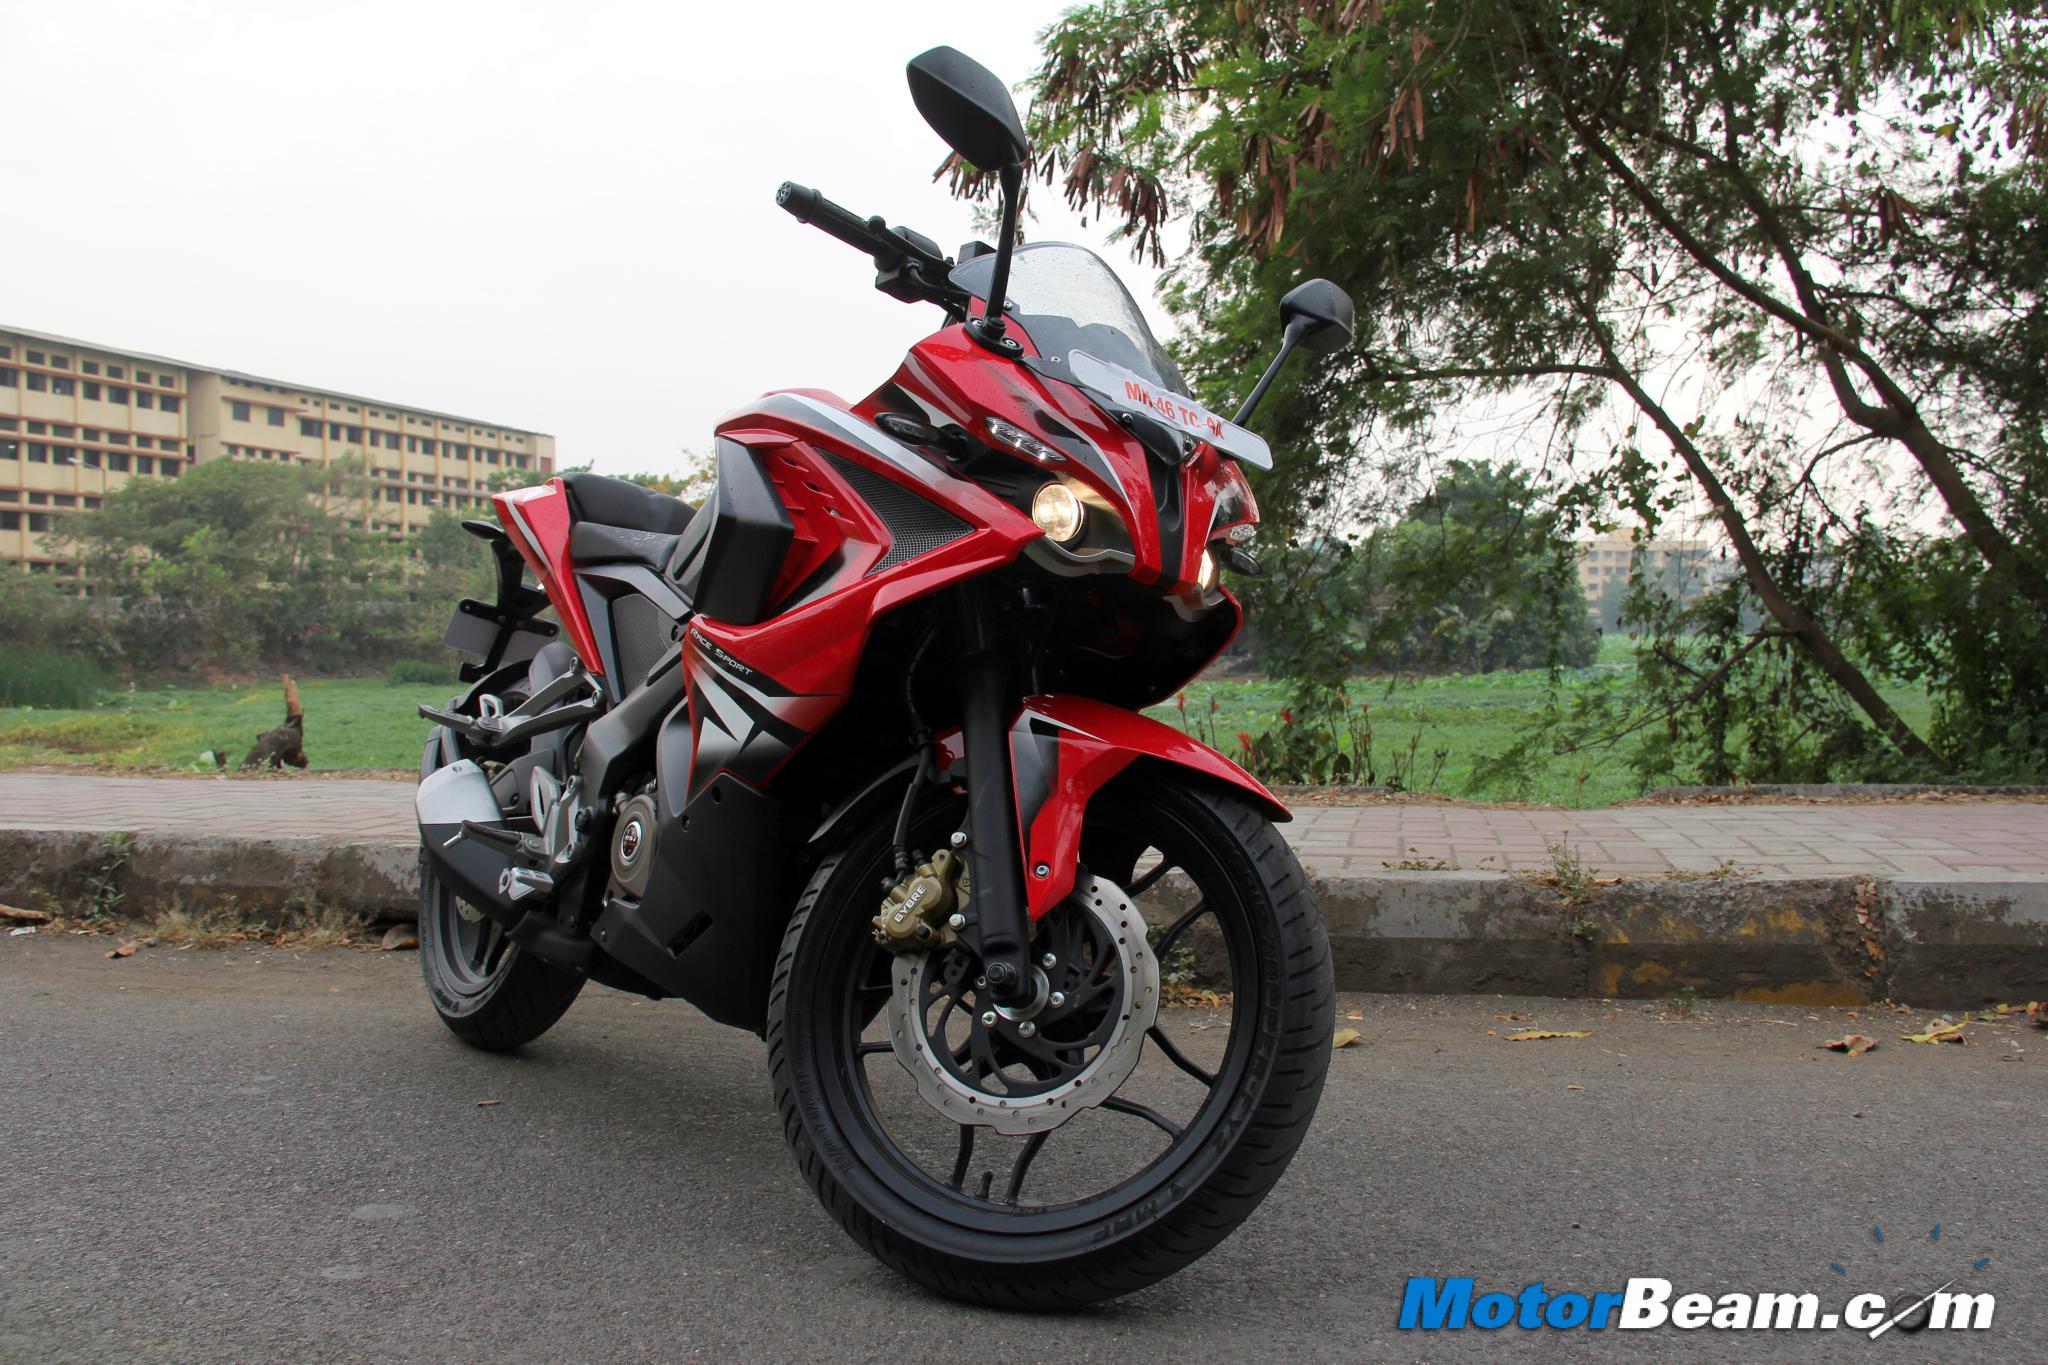 Pulsar Rs 0 Production Re Aligned To Match Demand Motorbeam